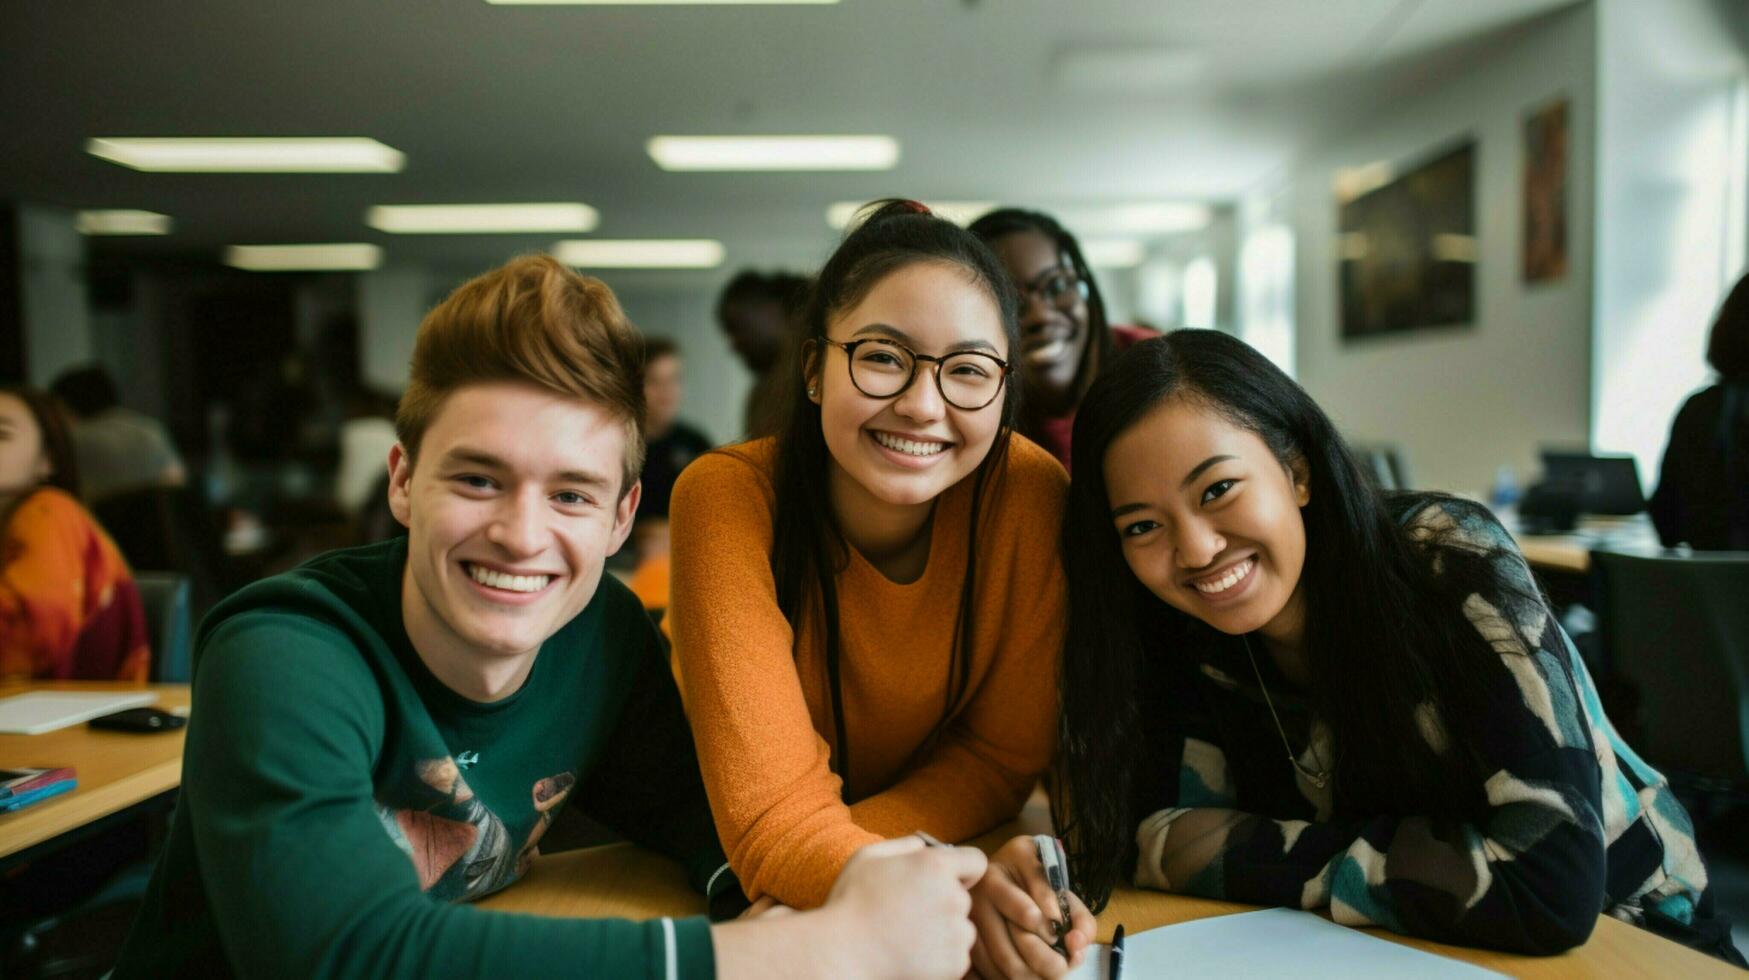 multi ethnic students in classroom smiling learning toget photo